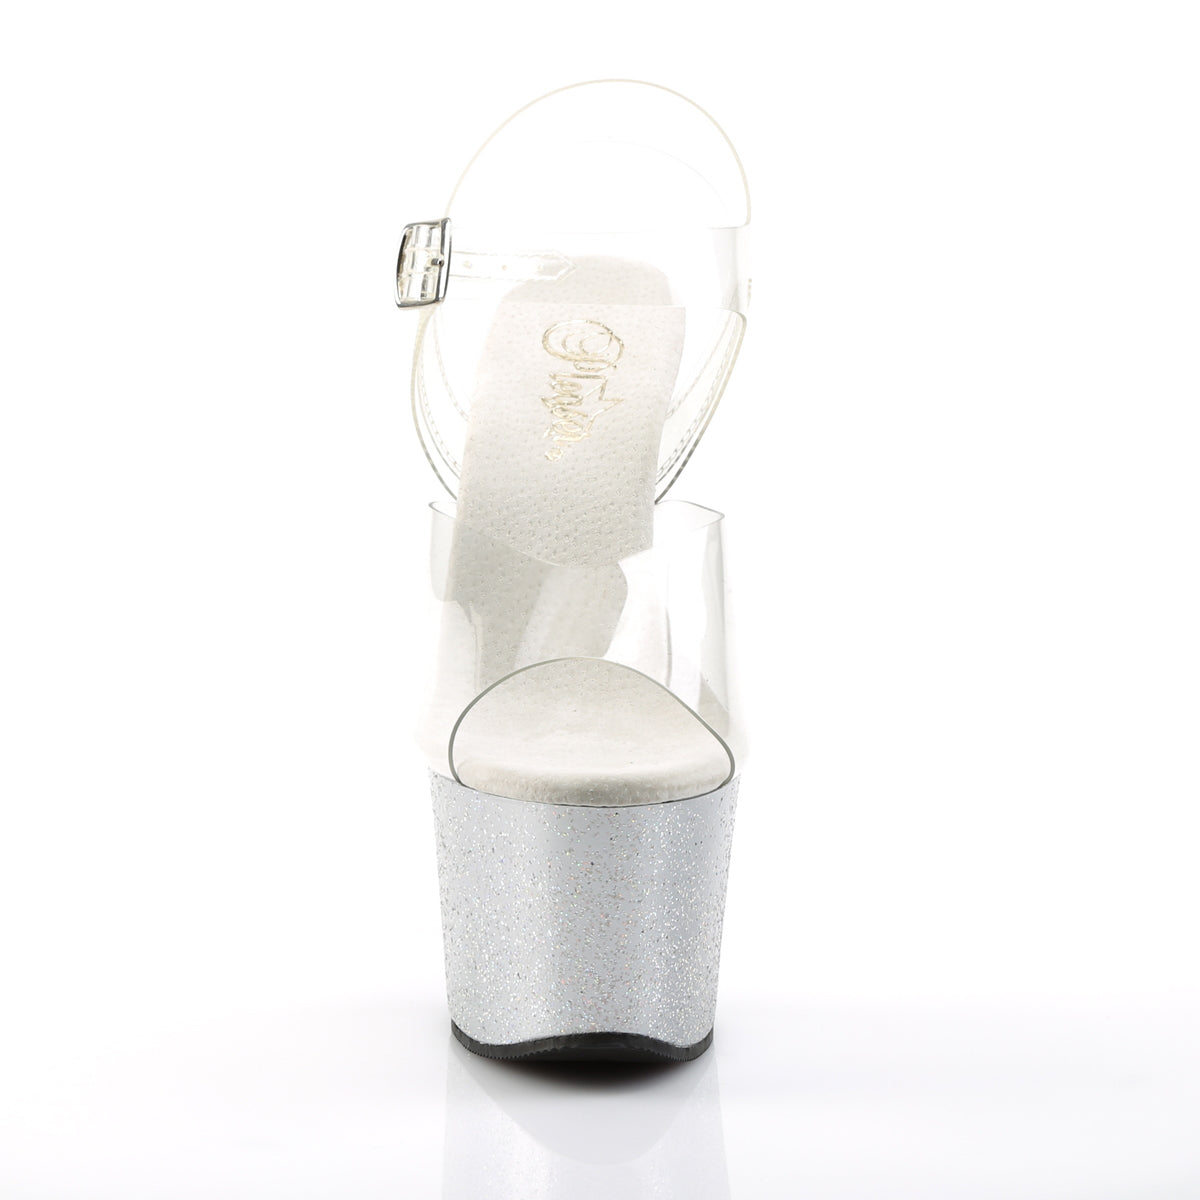 SKY-308MG 7" Heel Clear and Silver Pole Dancing Platforms-Pleaser- Sexy Shoes Alternative Footwear